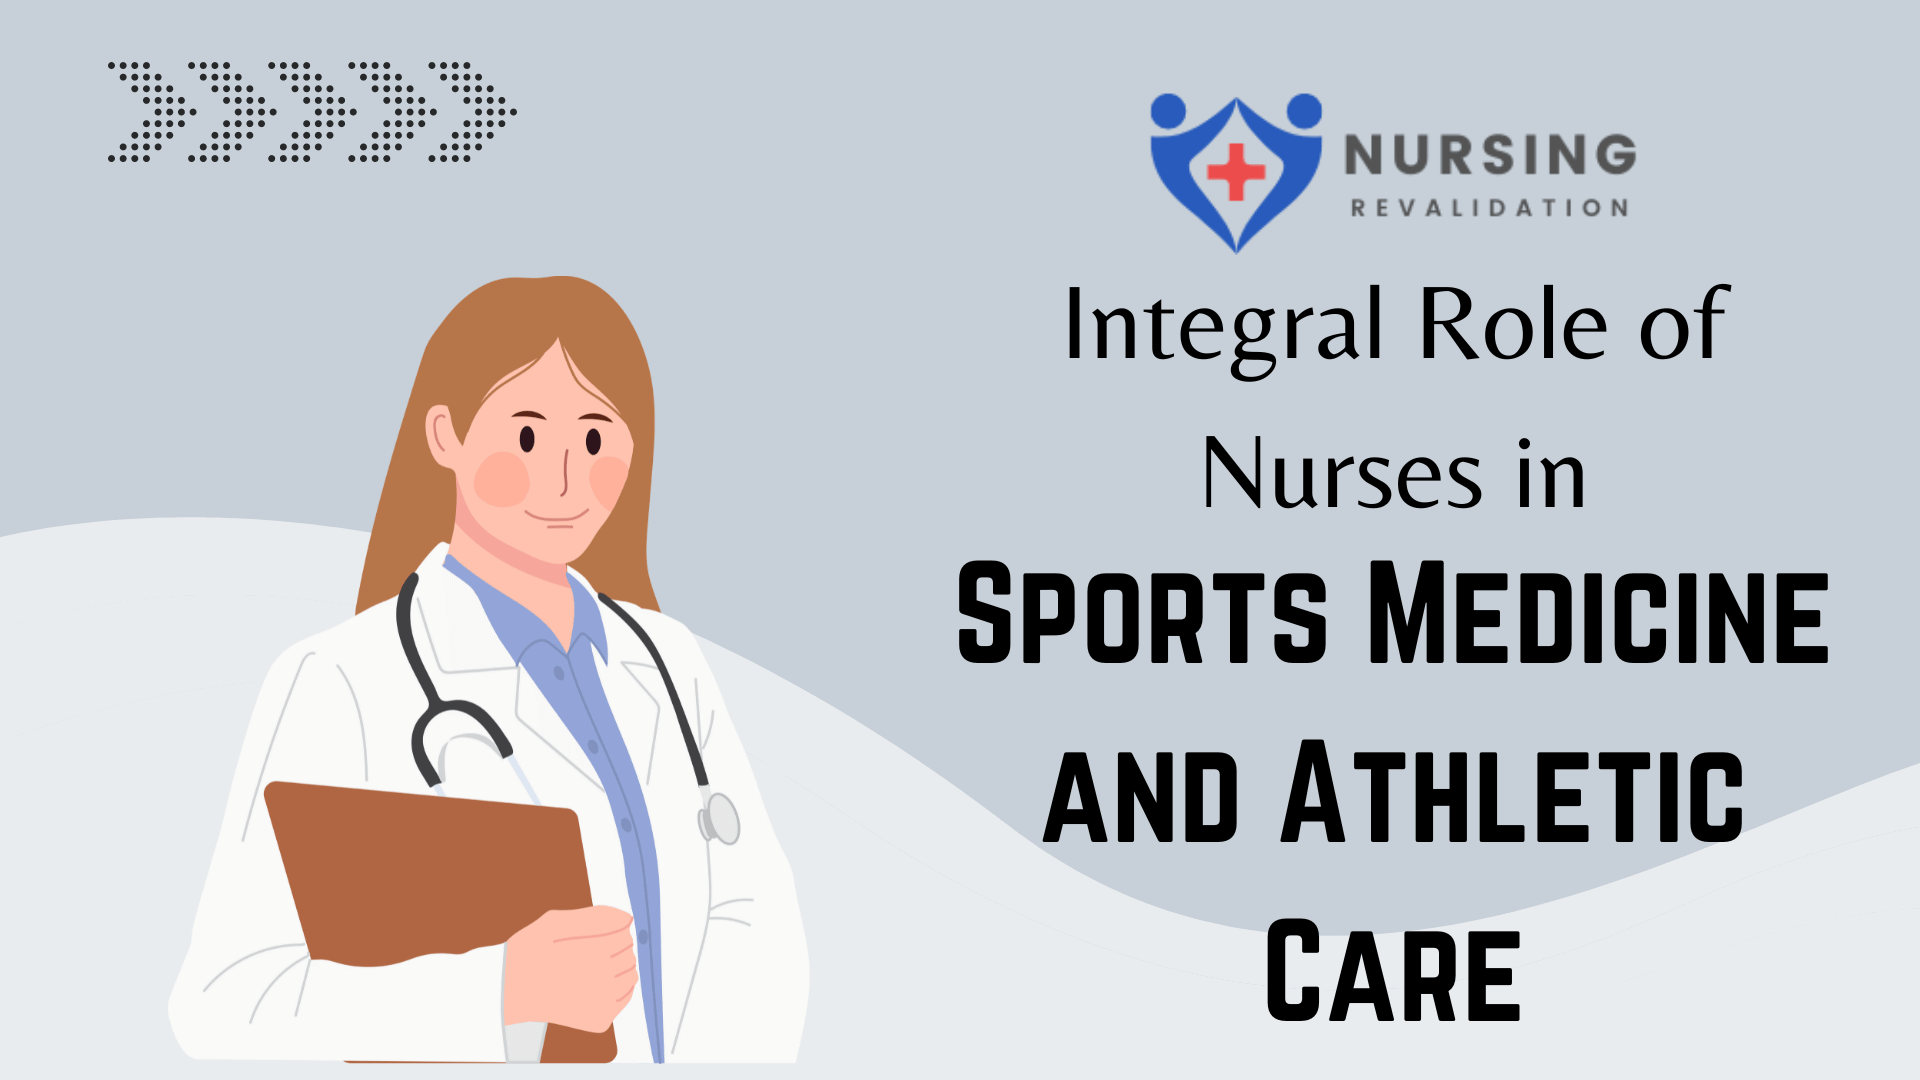 Integral Role of Nurses in Sports Medicine and Athletic Care